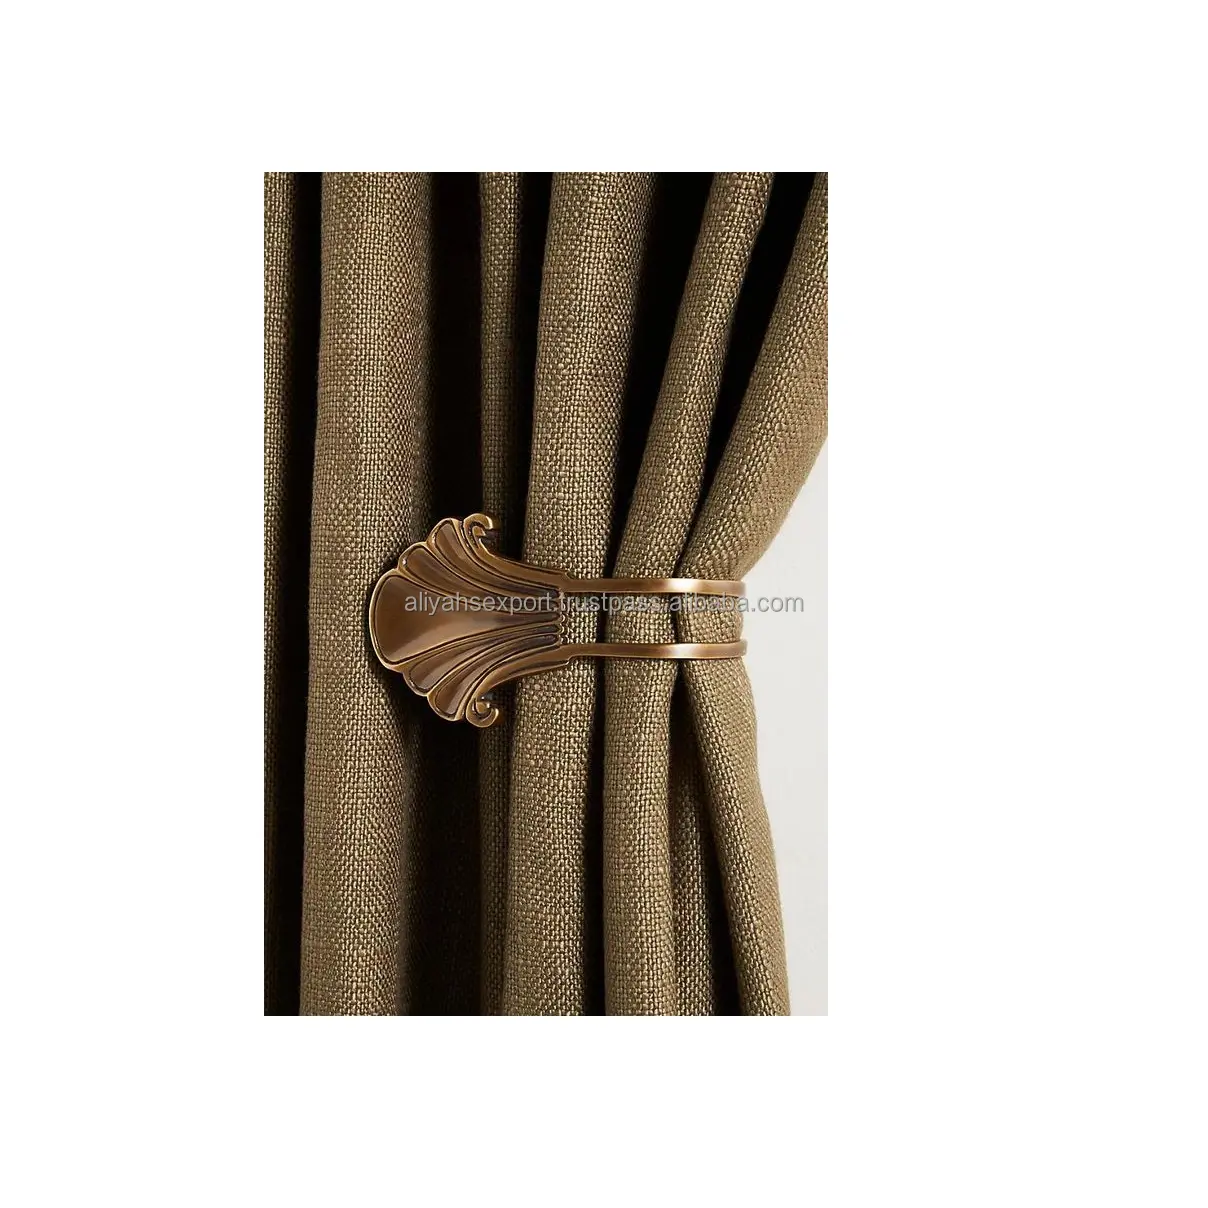 Solid Shiny Gold Curtain Single Rod Support Door and Window Fitting Hardware Drapery Hold back Holder Indoor Wall Window